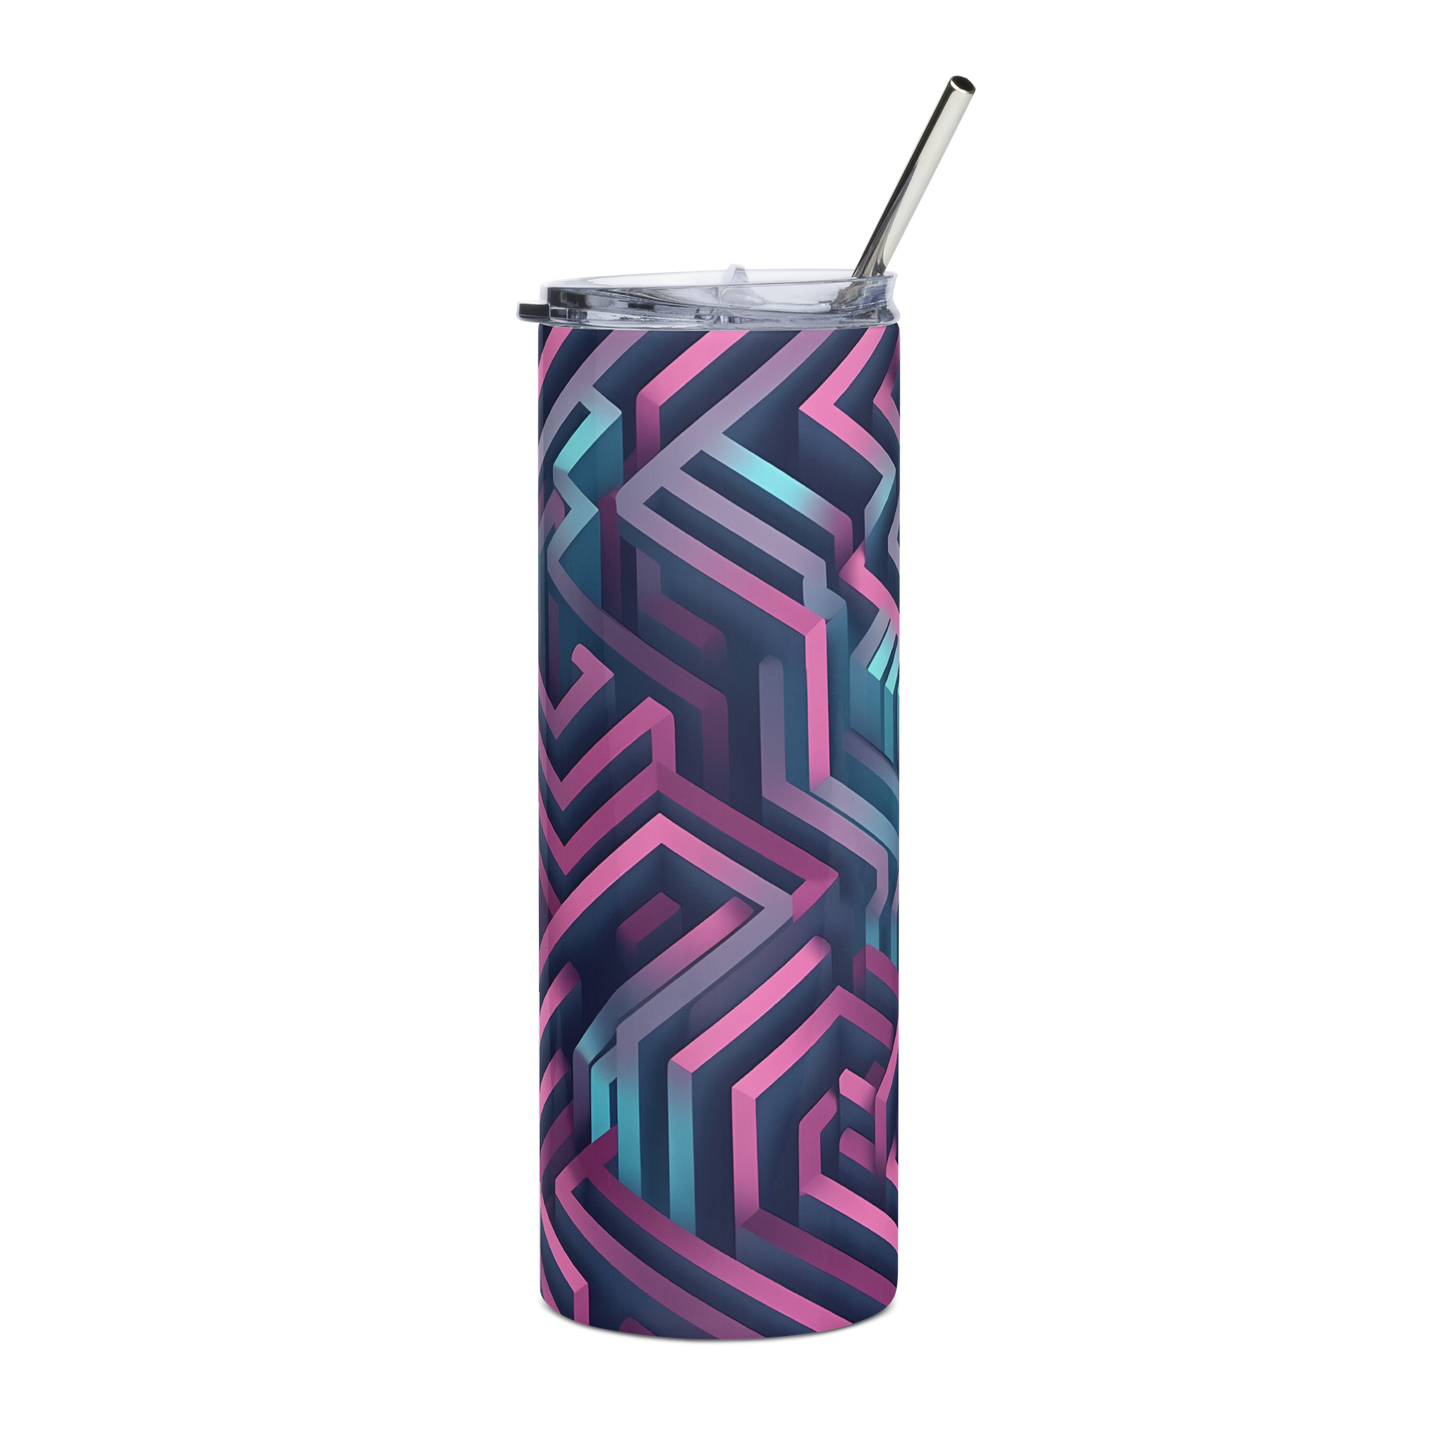 3D Maze Illusion | 3D Patterns | Stainless Steel Tumbler - #4